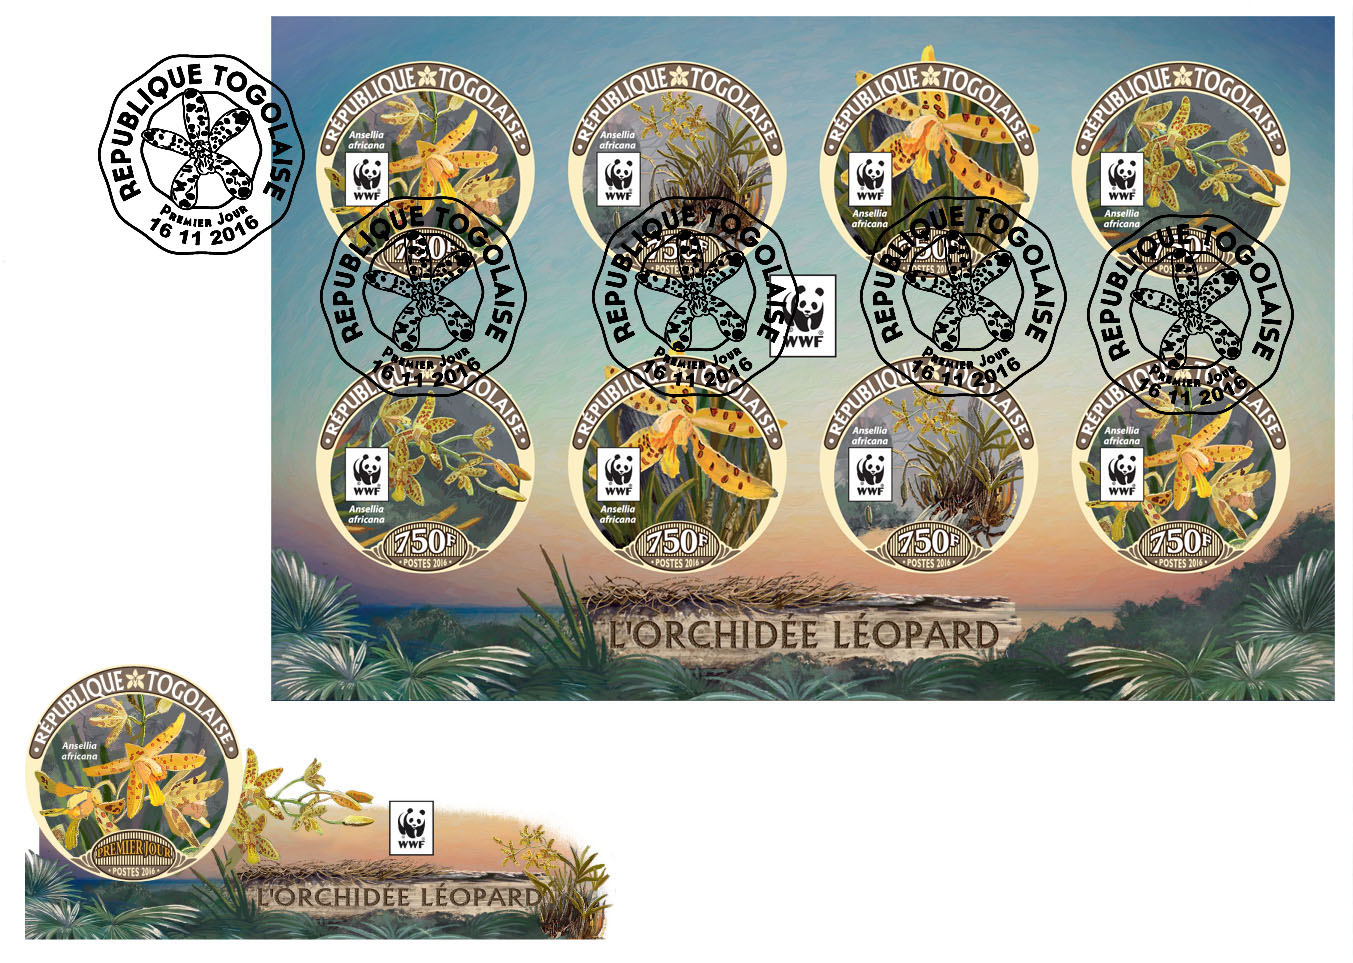 WWF – Orchids (FDC imperf.) - Issue of Togo postage stamps